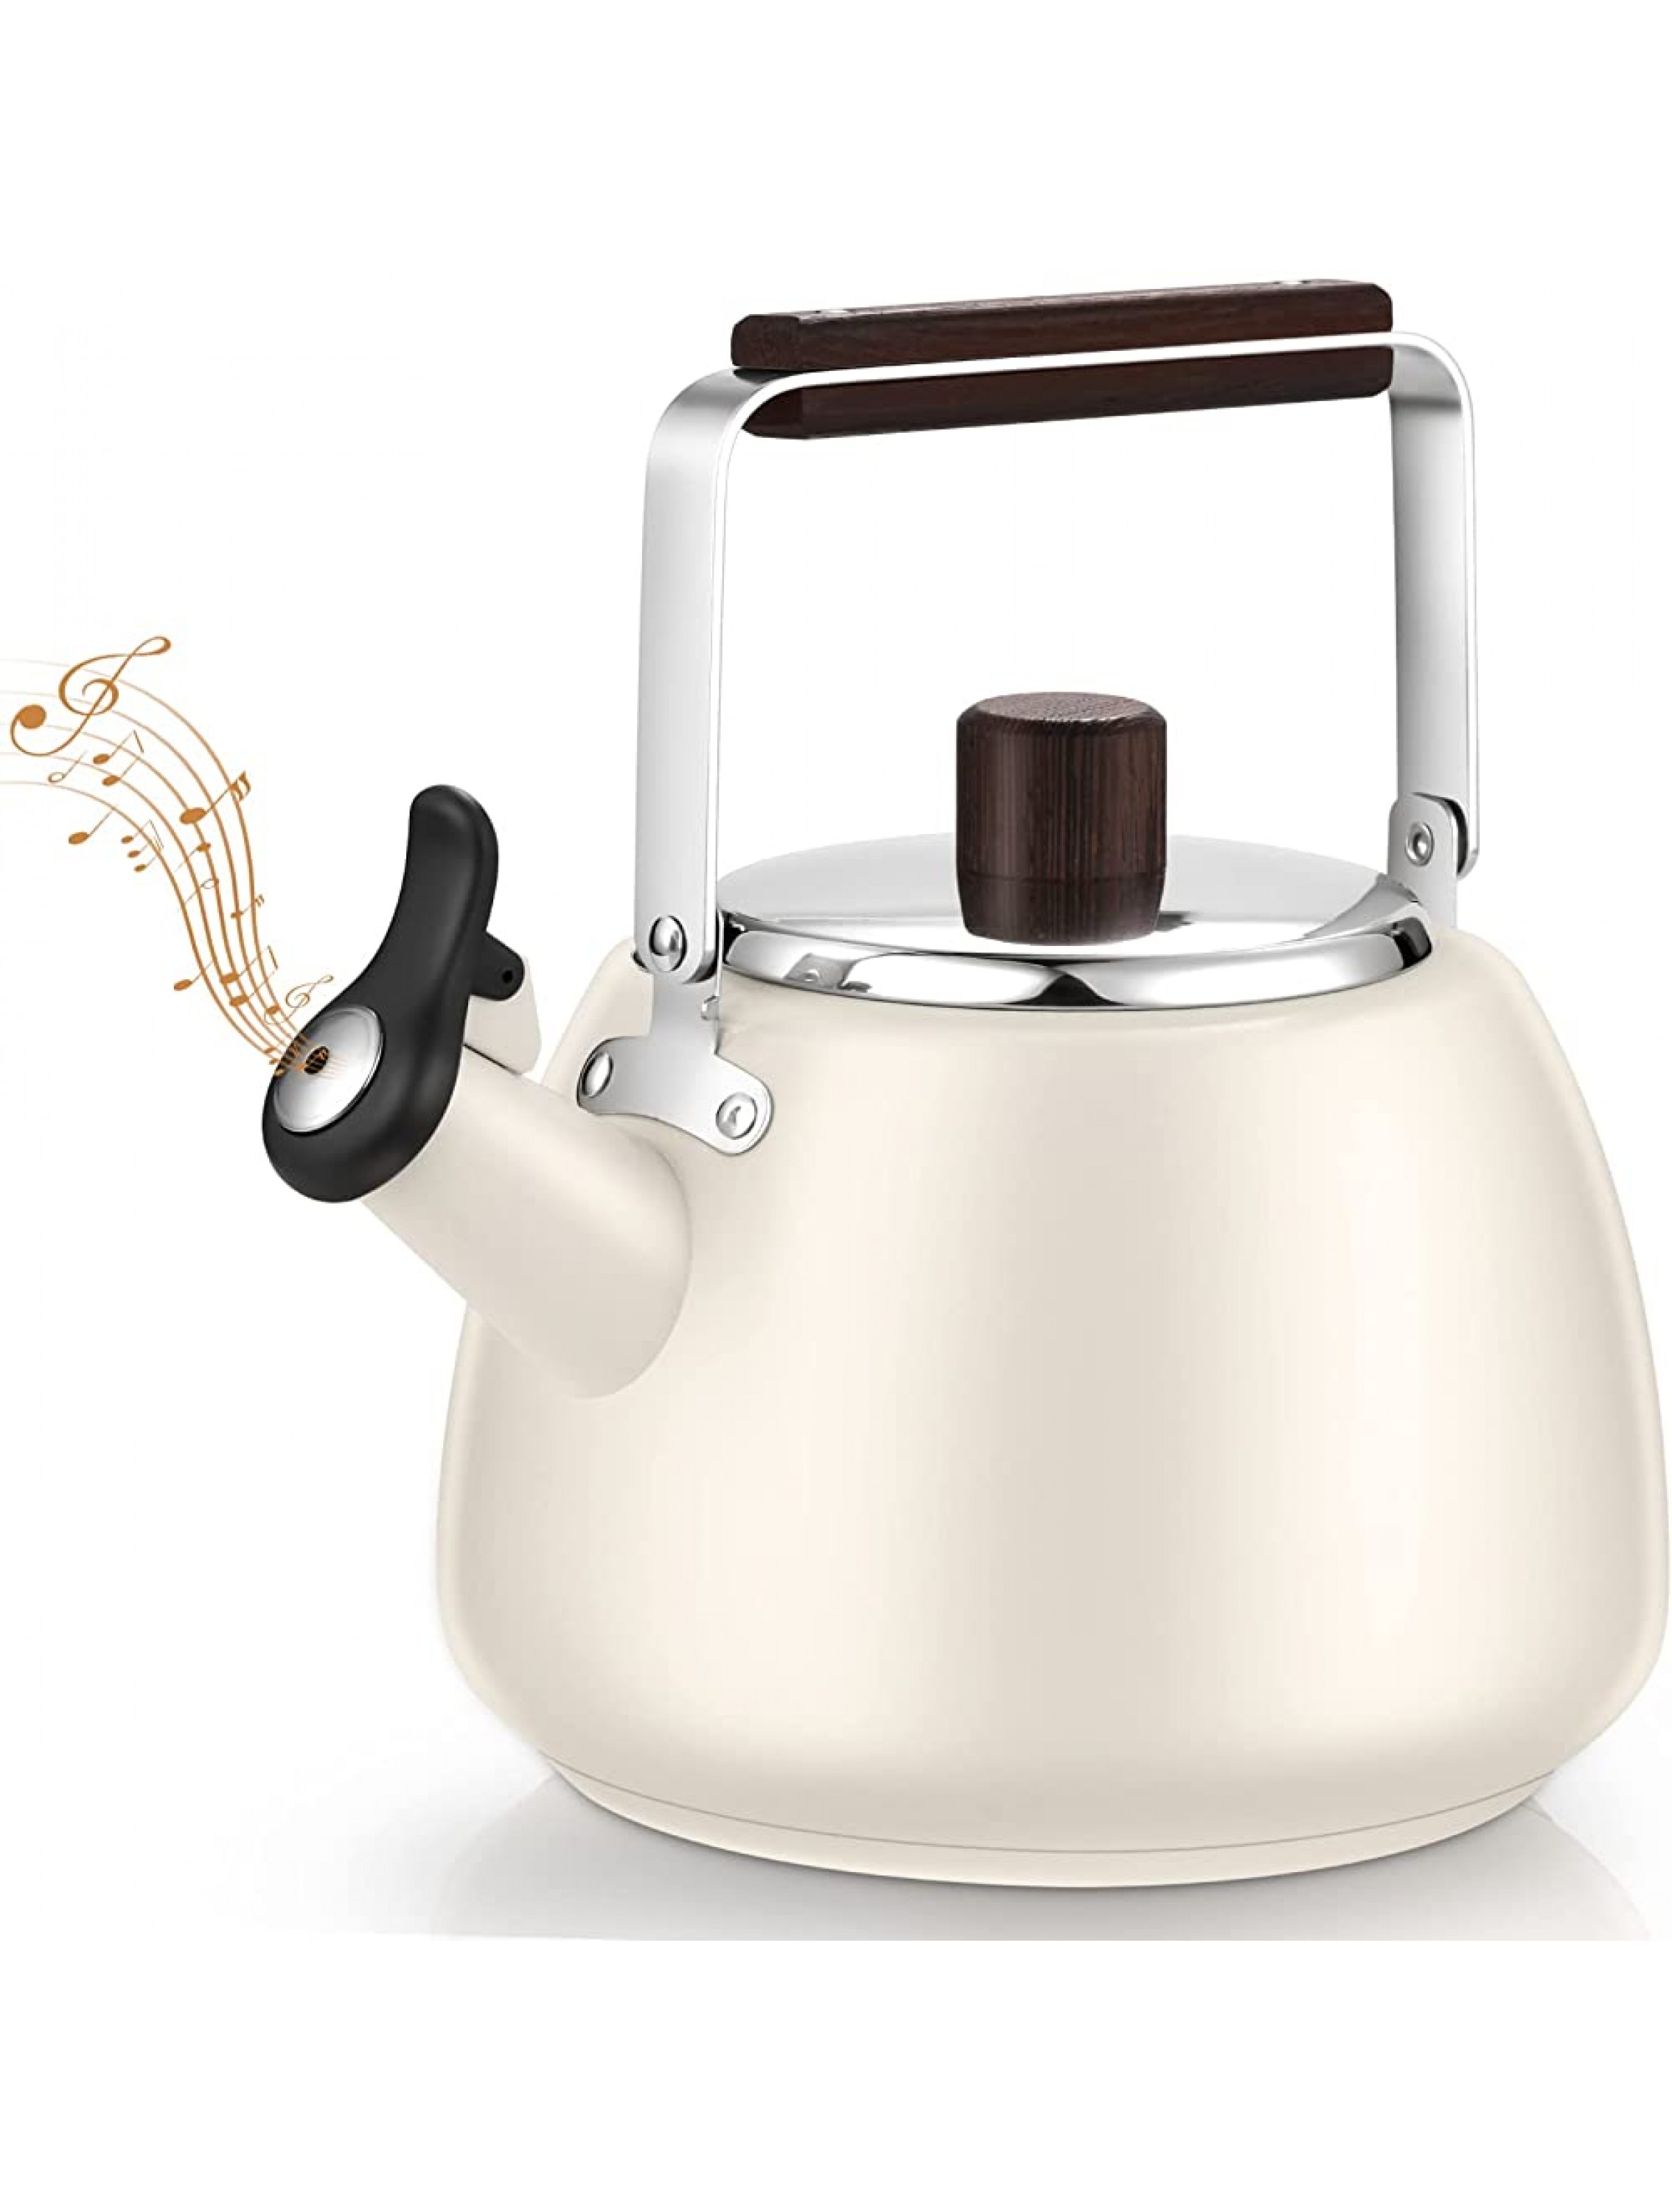 Tea Kettle Stovetop Modern Whistling Tea Kettle Surgical Stainless Steel Teakettle Teapot With High-Temp Resistant Lacquer & Wood Handle- Perfect for Preparing Hot Water Fast for Coffee Tea 2 Quart - BVDCK1AH5